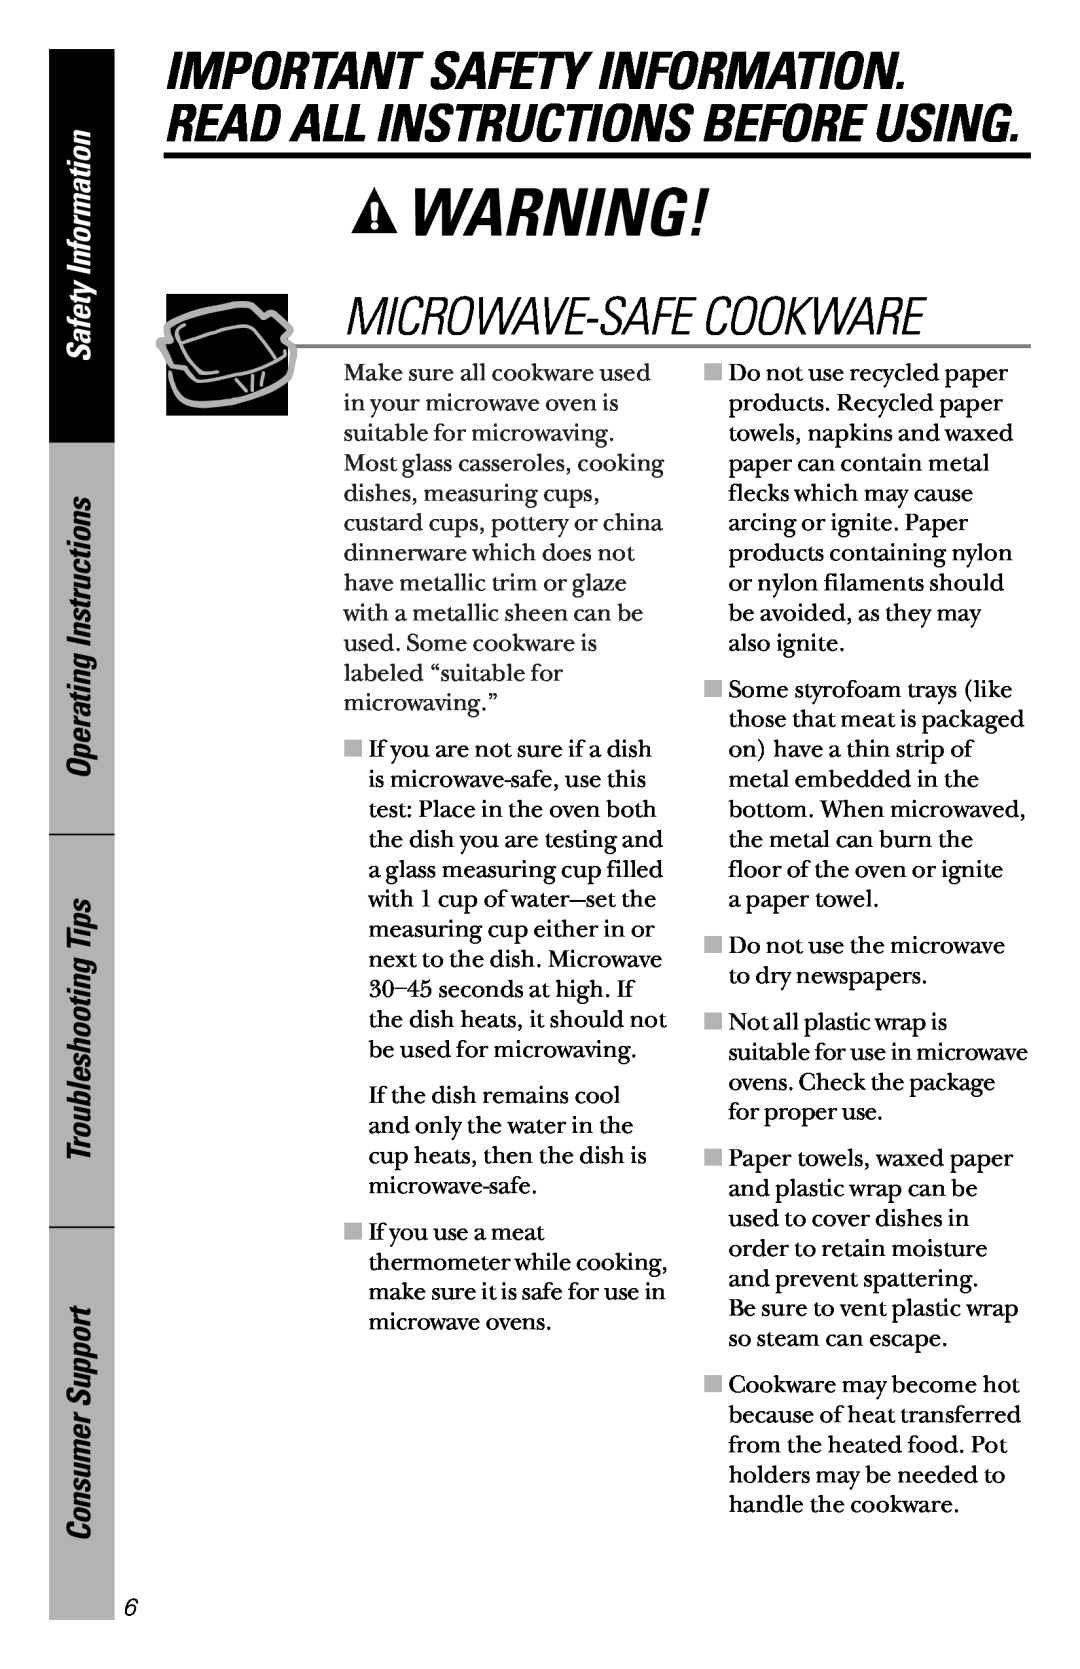 GE JVM1533 Microwave-Safe Cookware, Operating Instructions Troubleshooting Tips Consumer Support, Safety Information 